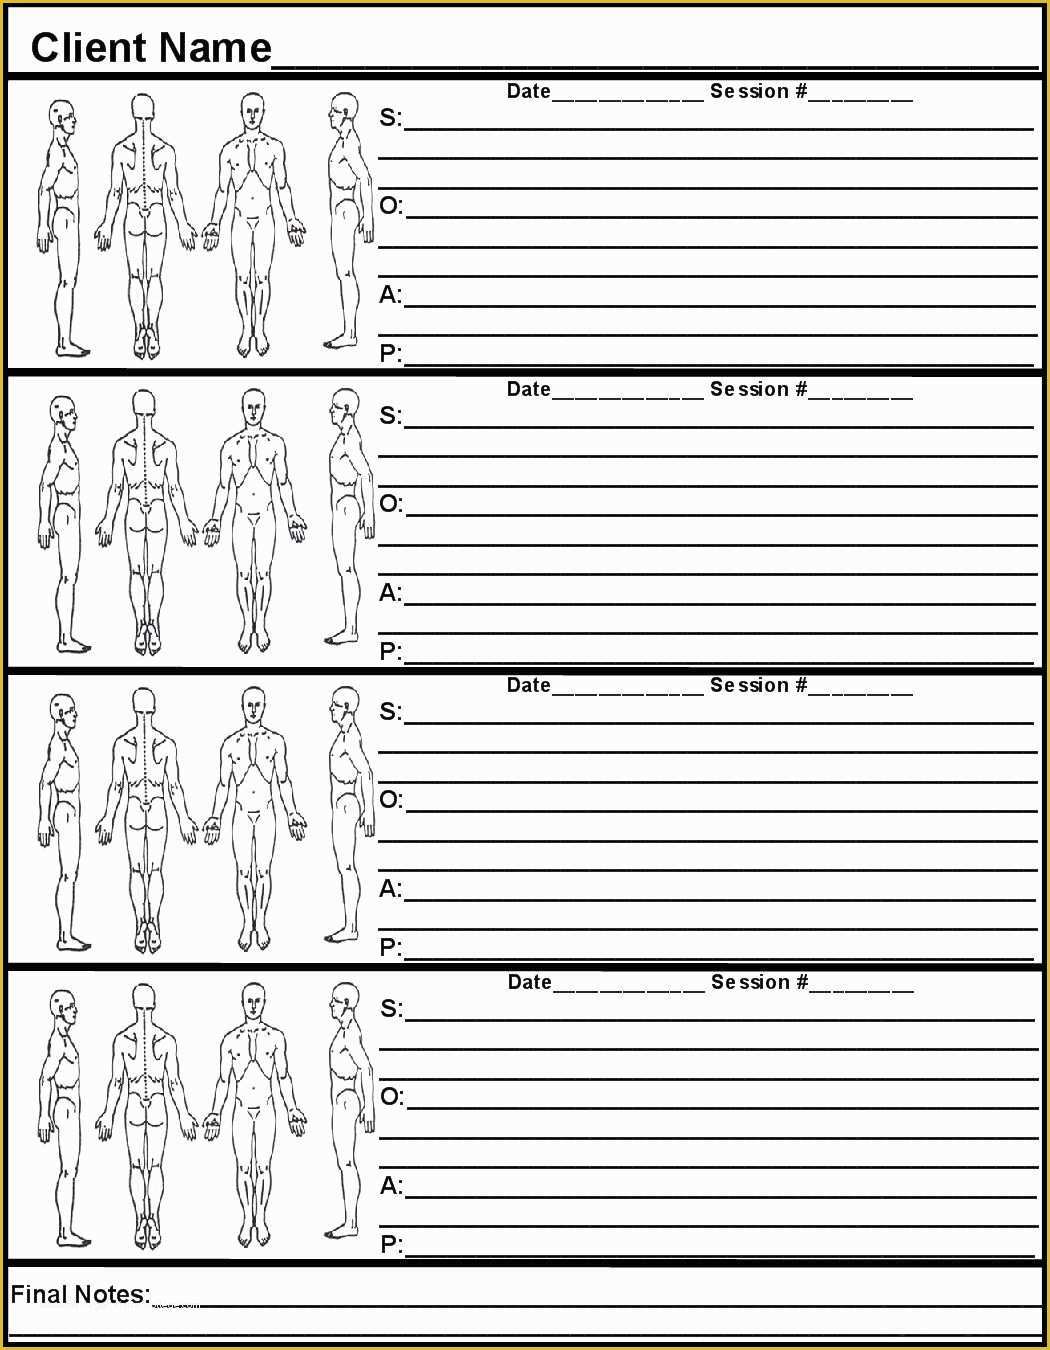 Chiropractic soap Notes Template Free Of Free Massage soap forms Resources &amp; Downloads